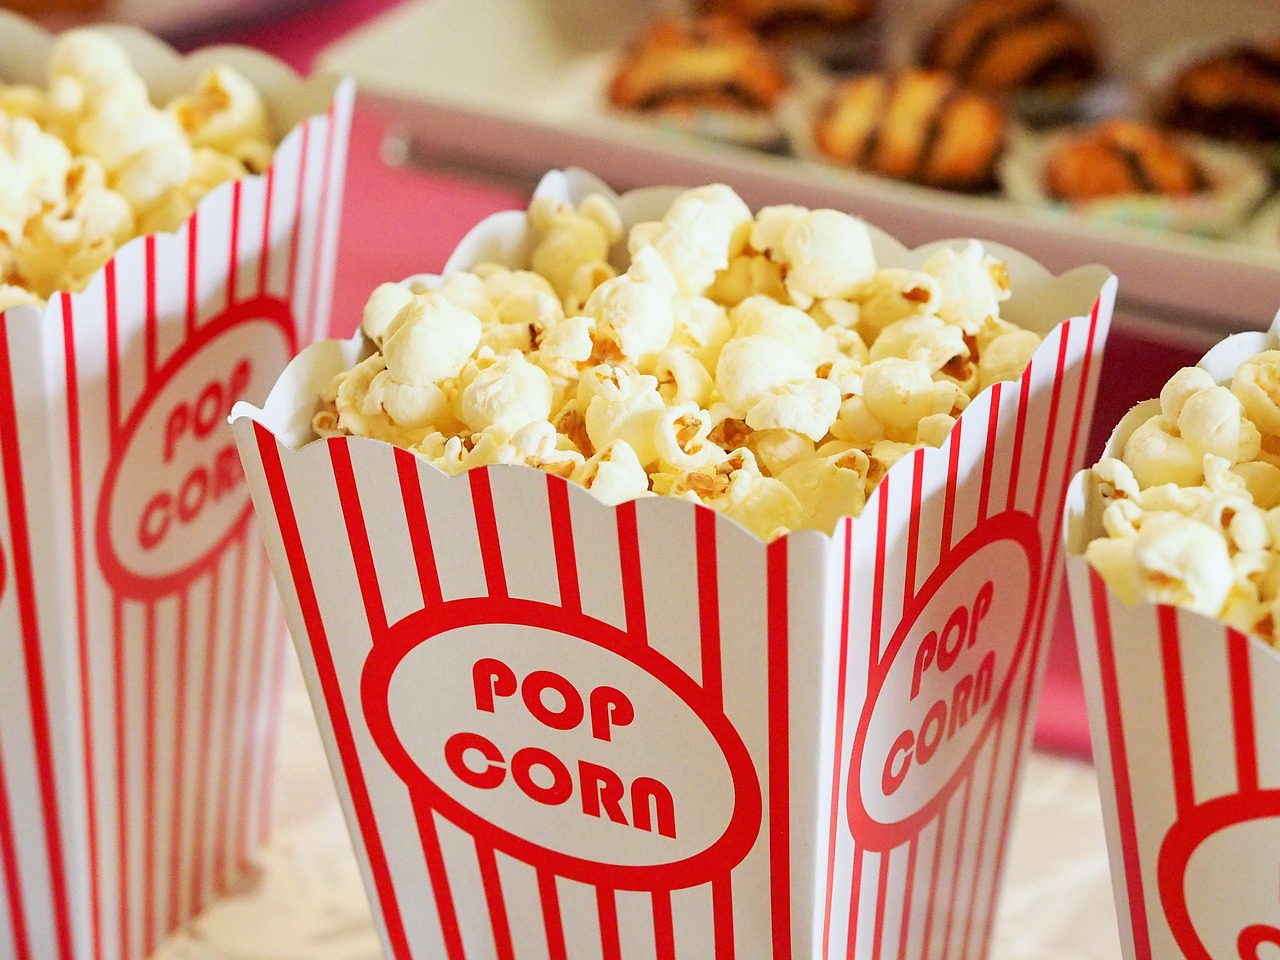 The Cinema Foundation Announces National Popcorn Day,  with Major Discounts on Movie Concessions, Arriving at a Theatre Near You on January 19th